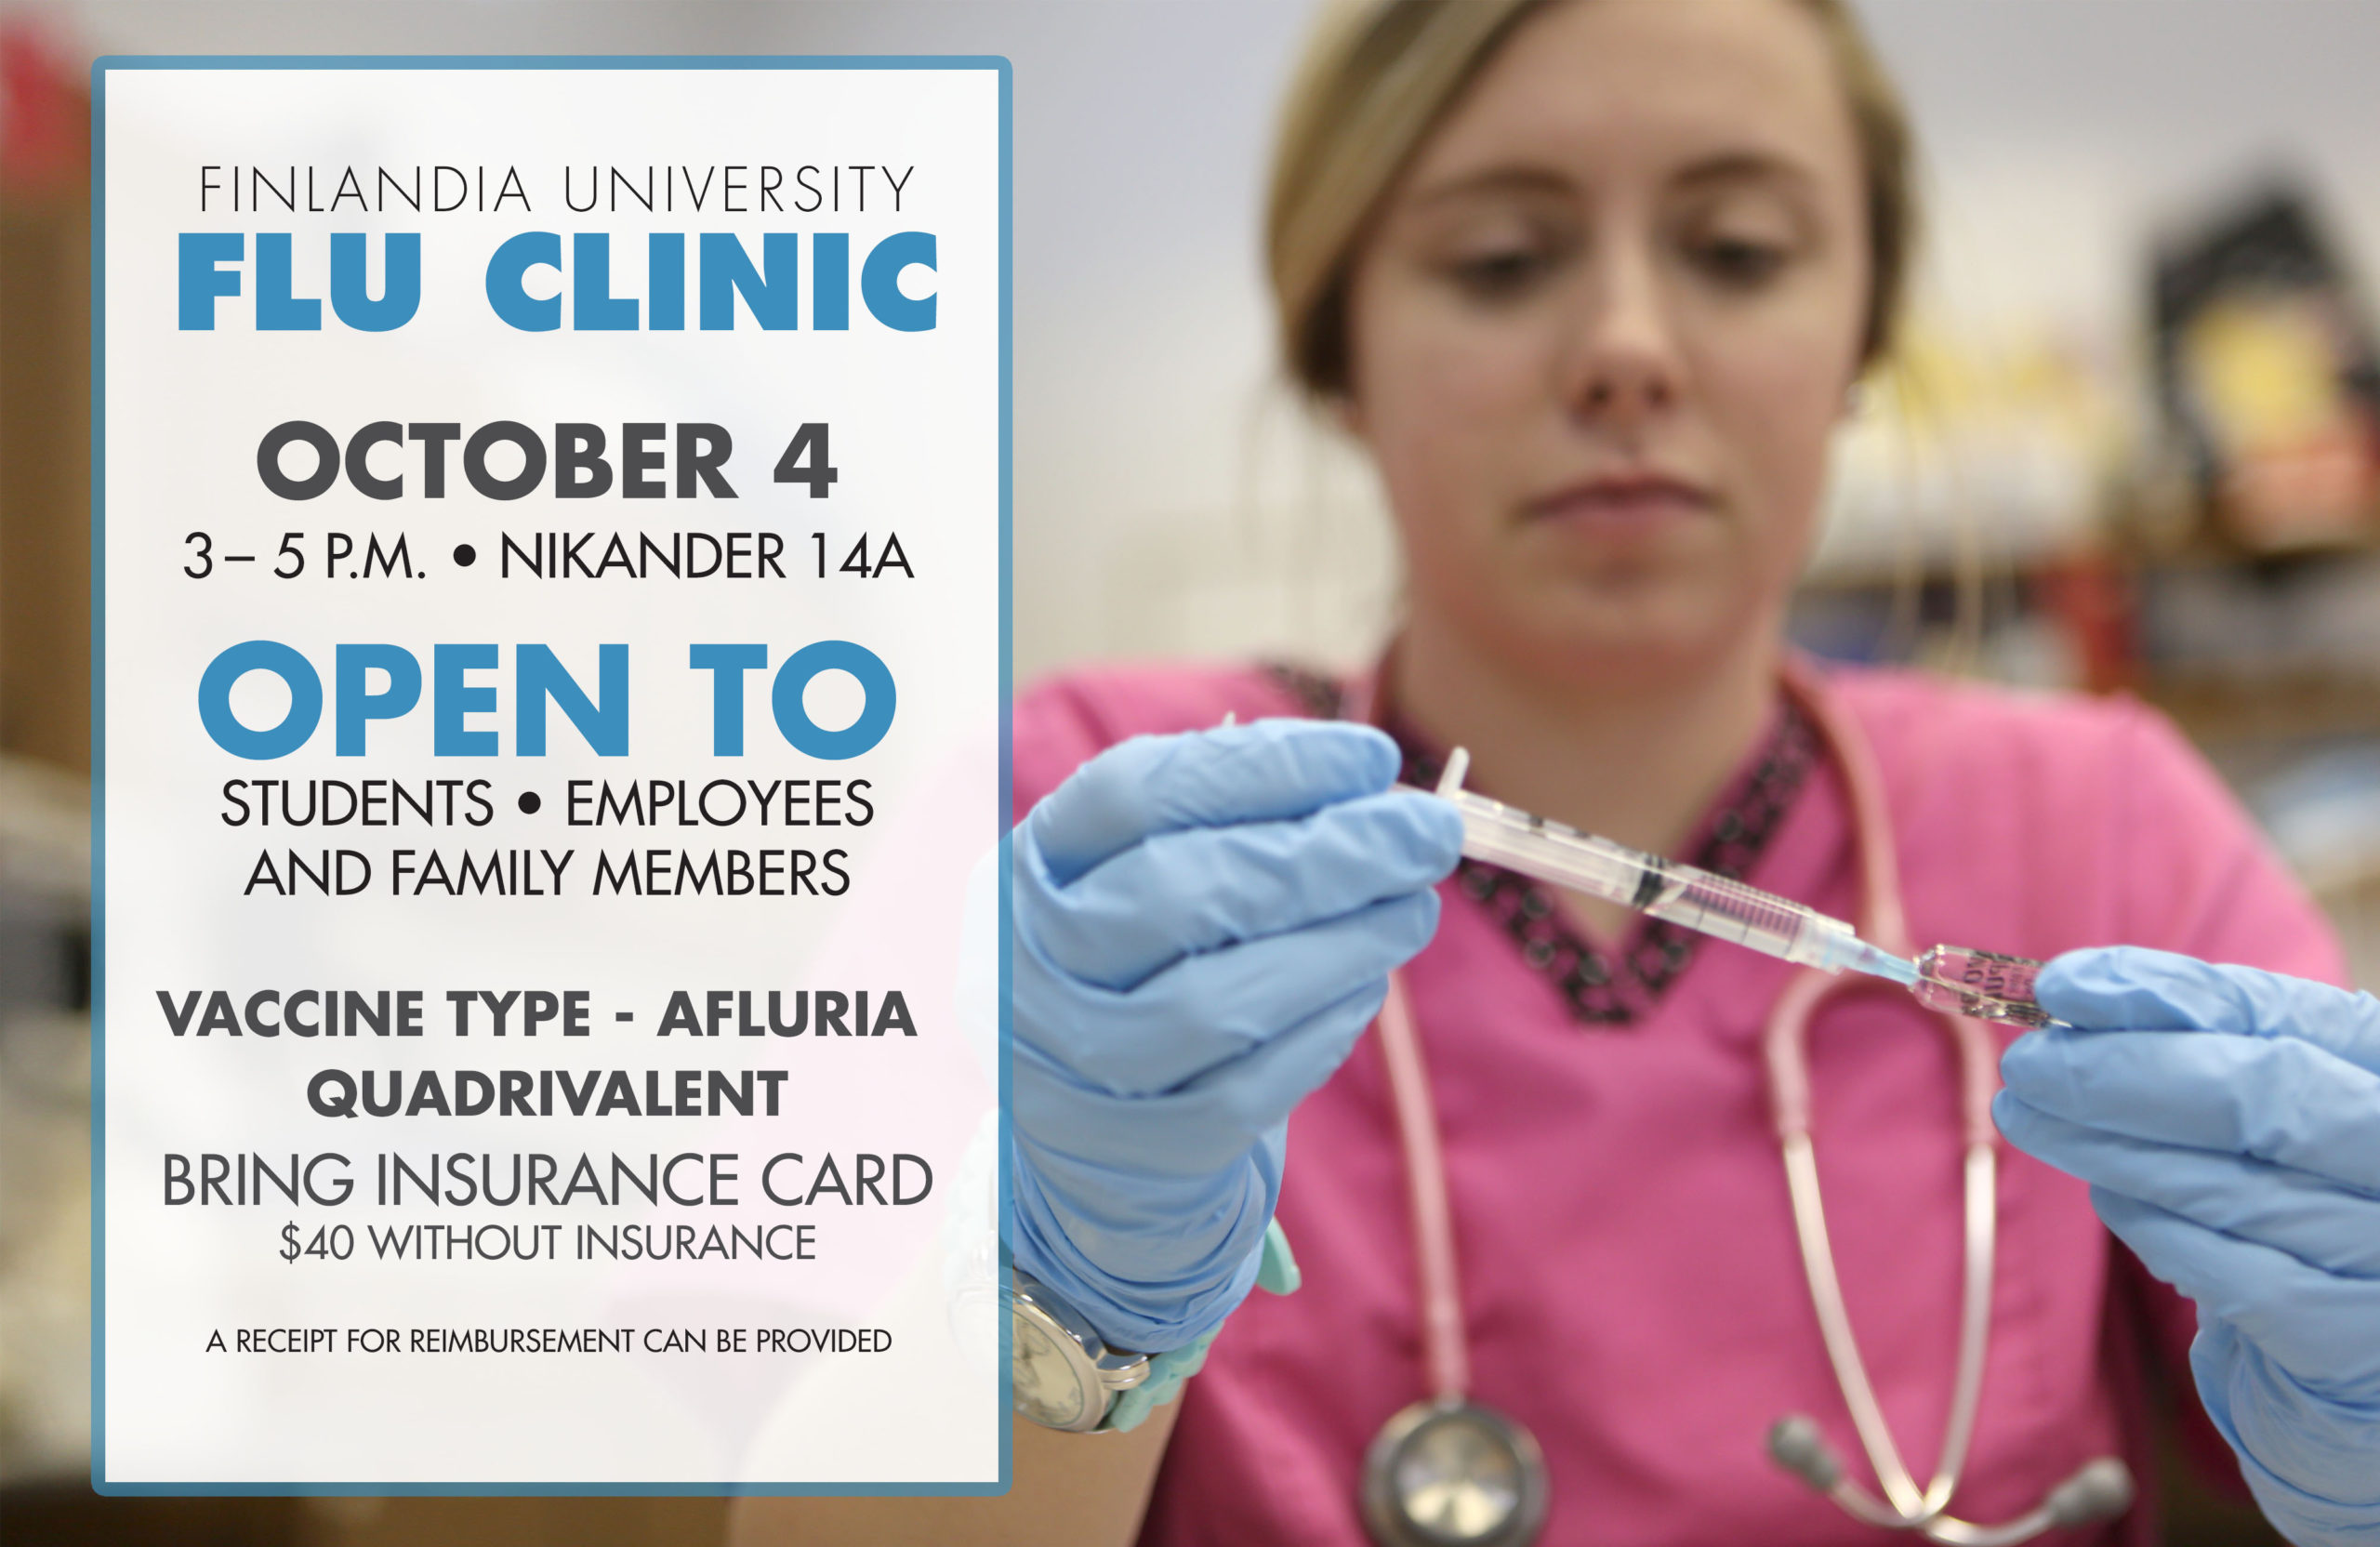 Flu shot clinic for students, employees on Oct. 4 Finlandia